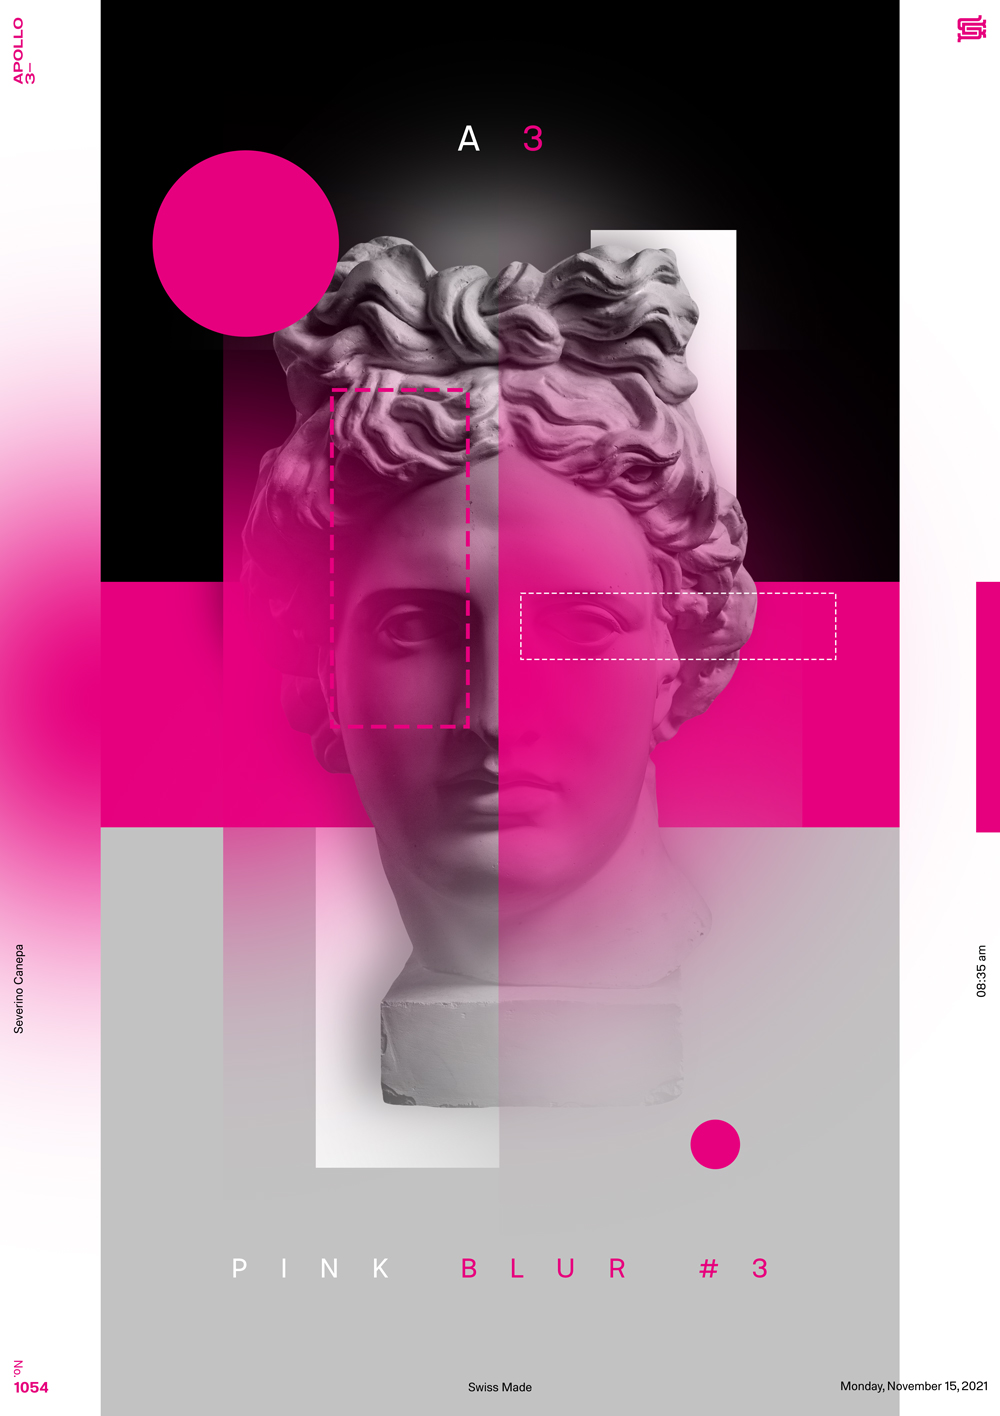 Digital creation made with a minimalist color scheme, gradient, and the statue of Apollo